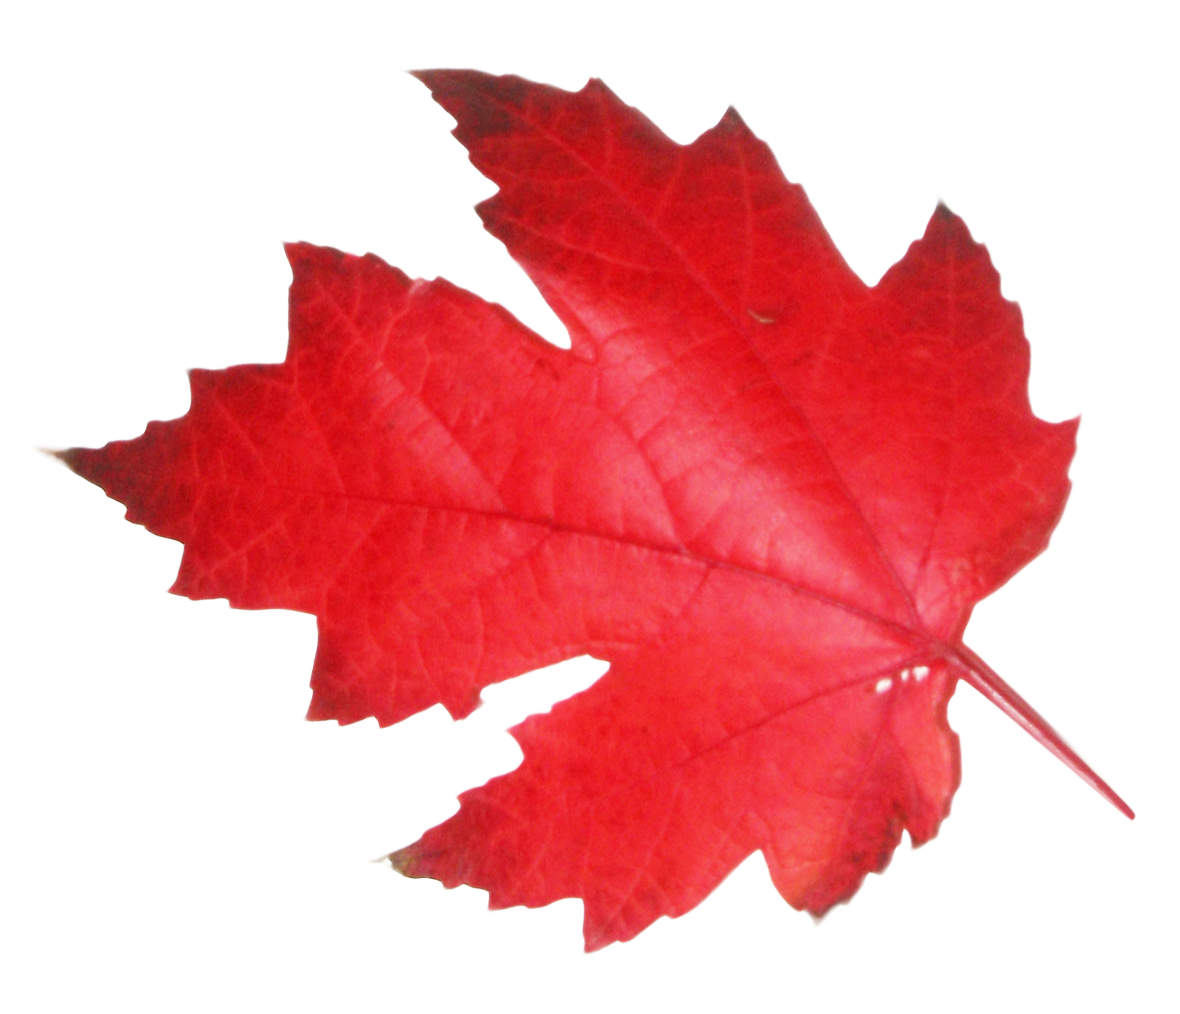 Maple Leaf PNG Image PurePNG Free Transparent CC0 PNG Image Library